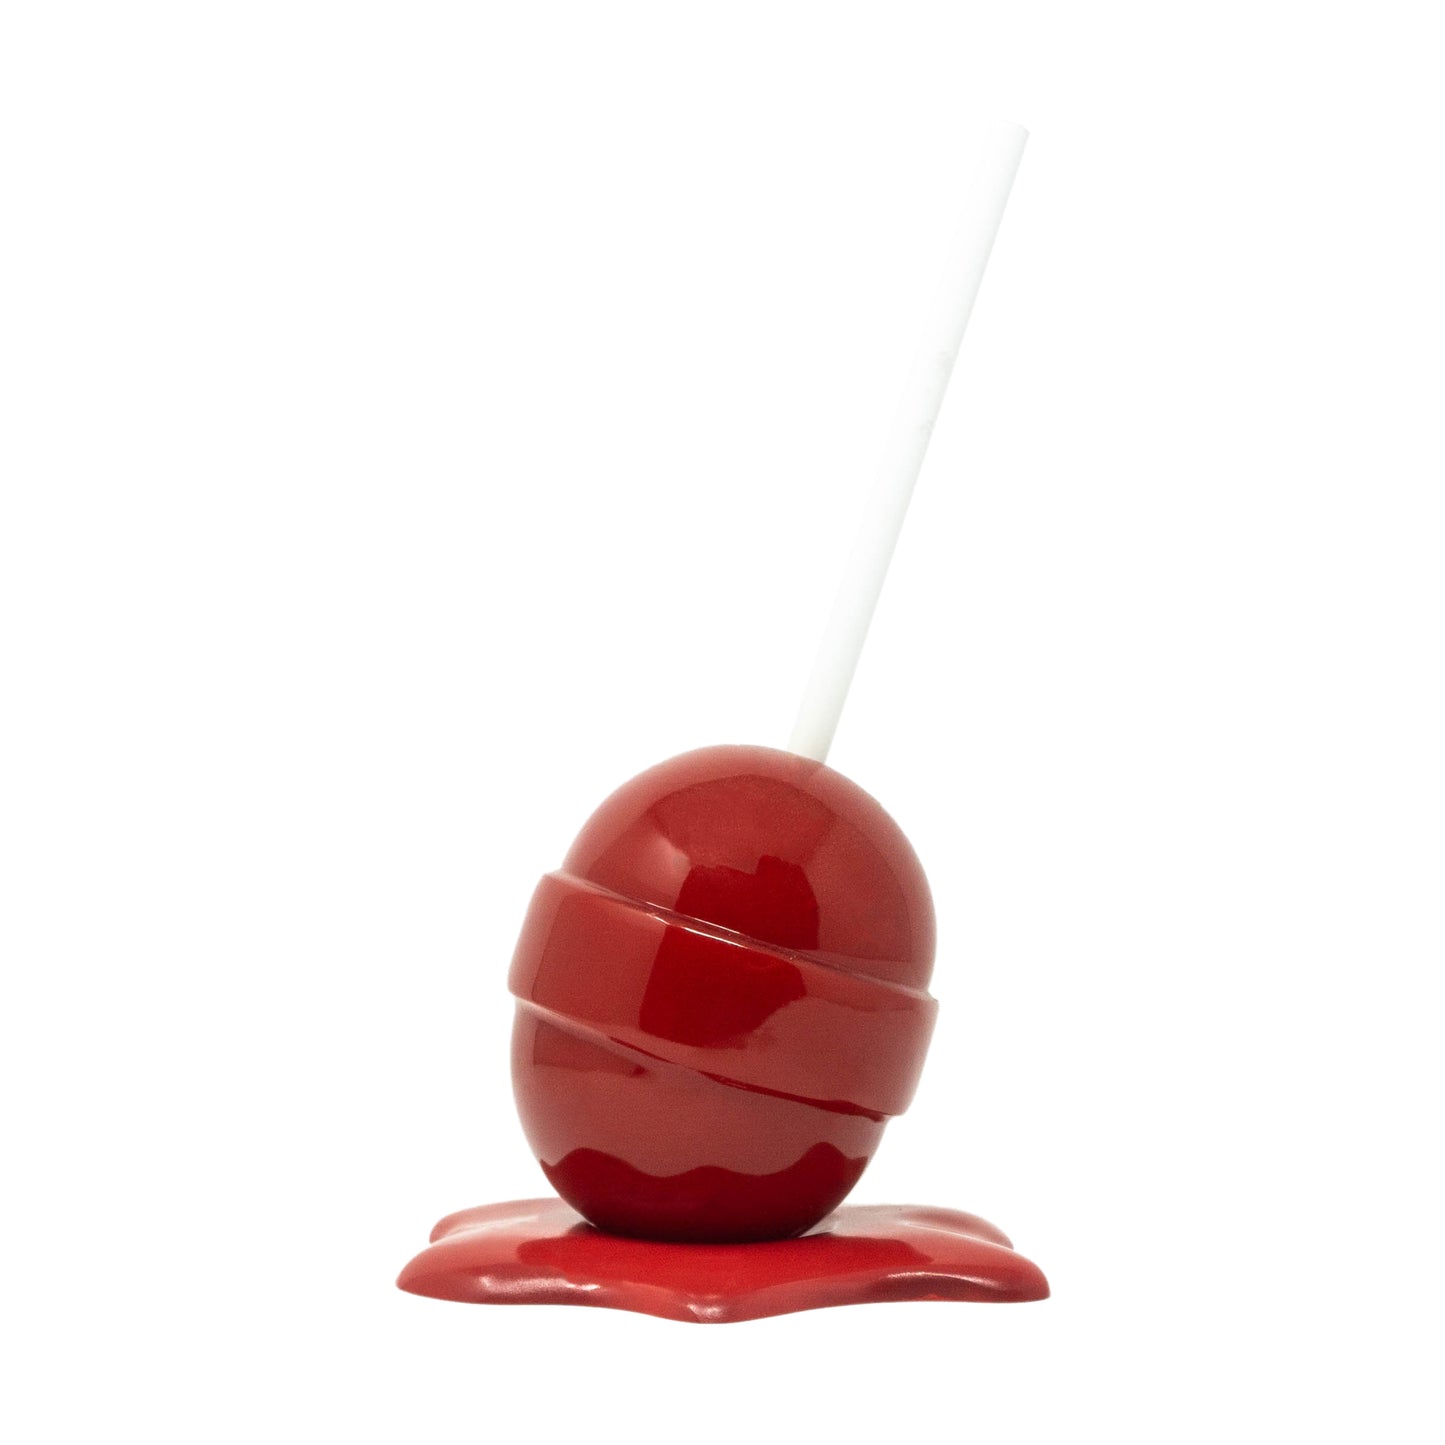 LARGE CHERRY BOMB RED MELTING BLOW POP RESIN SCULPTURE